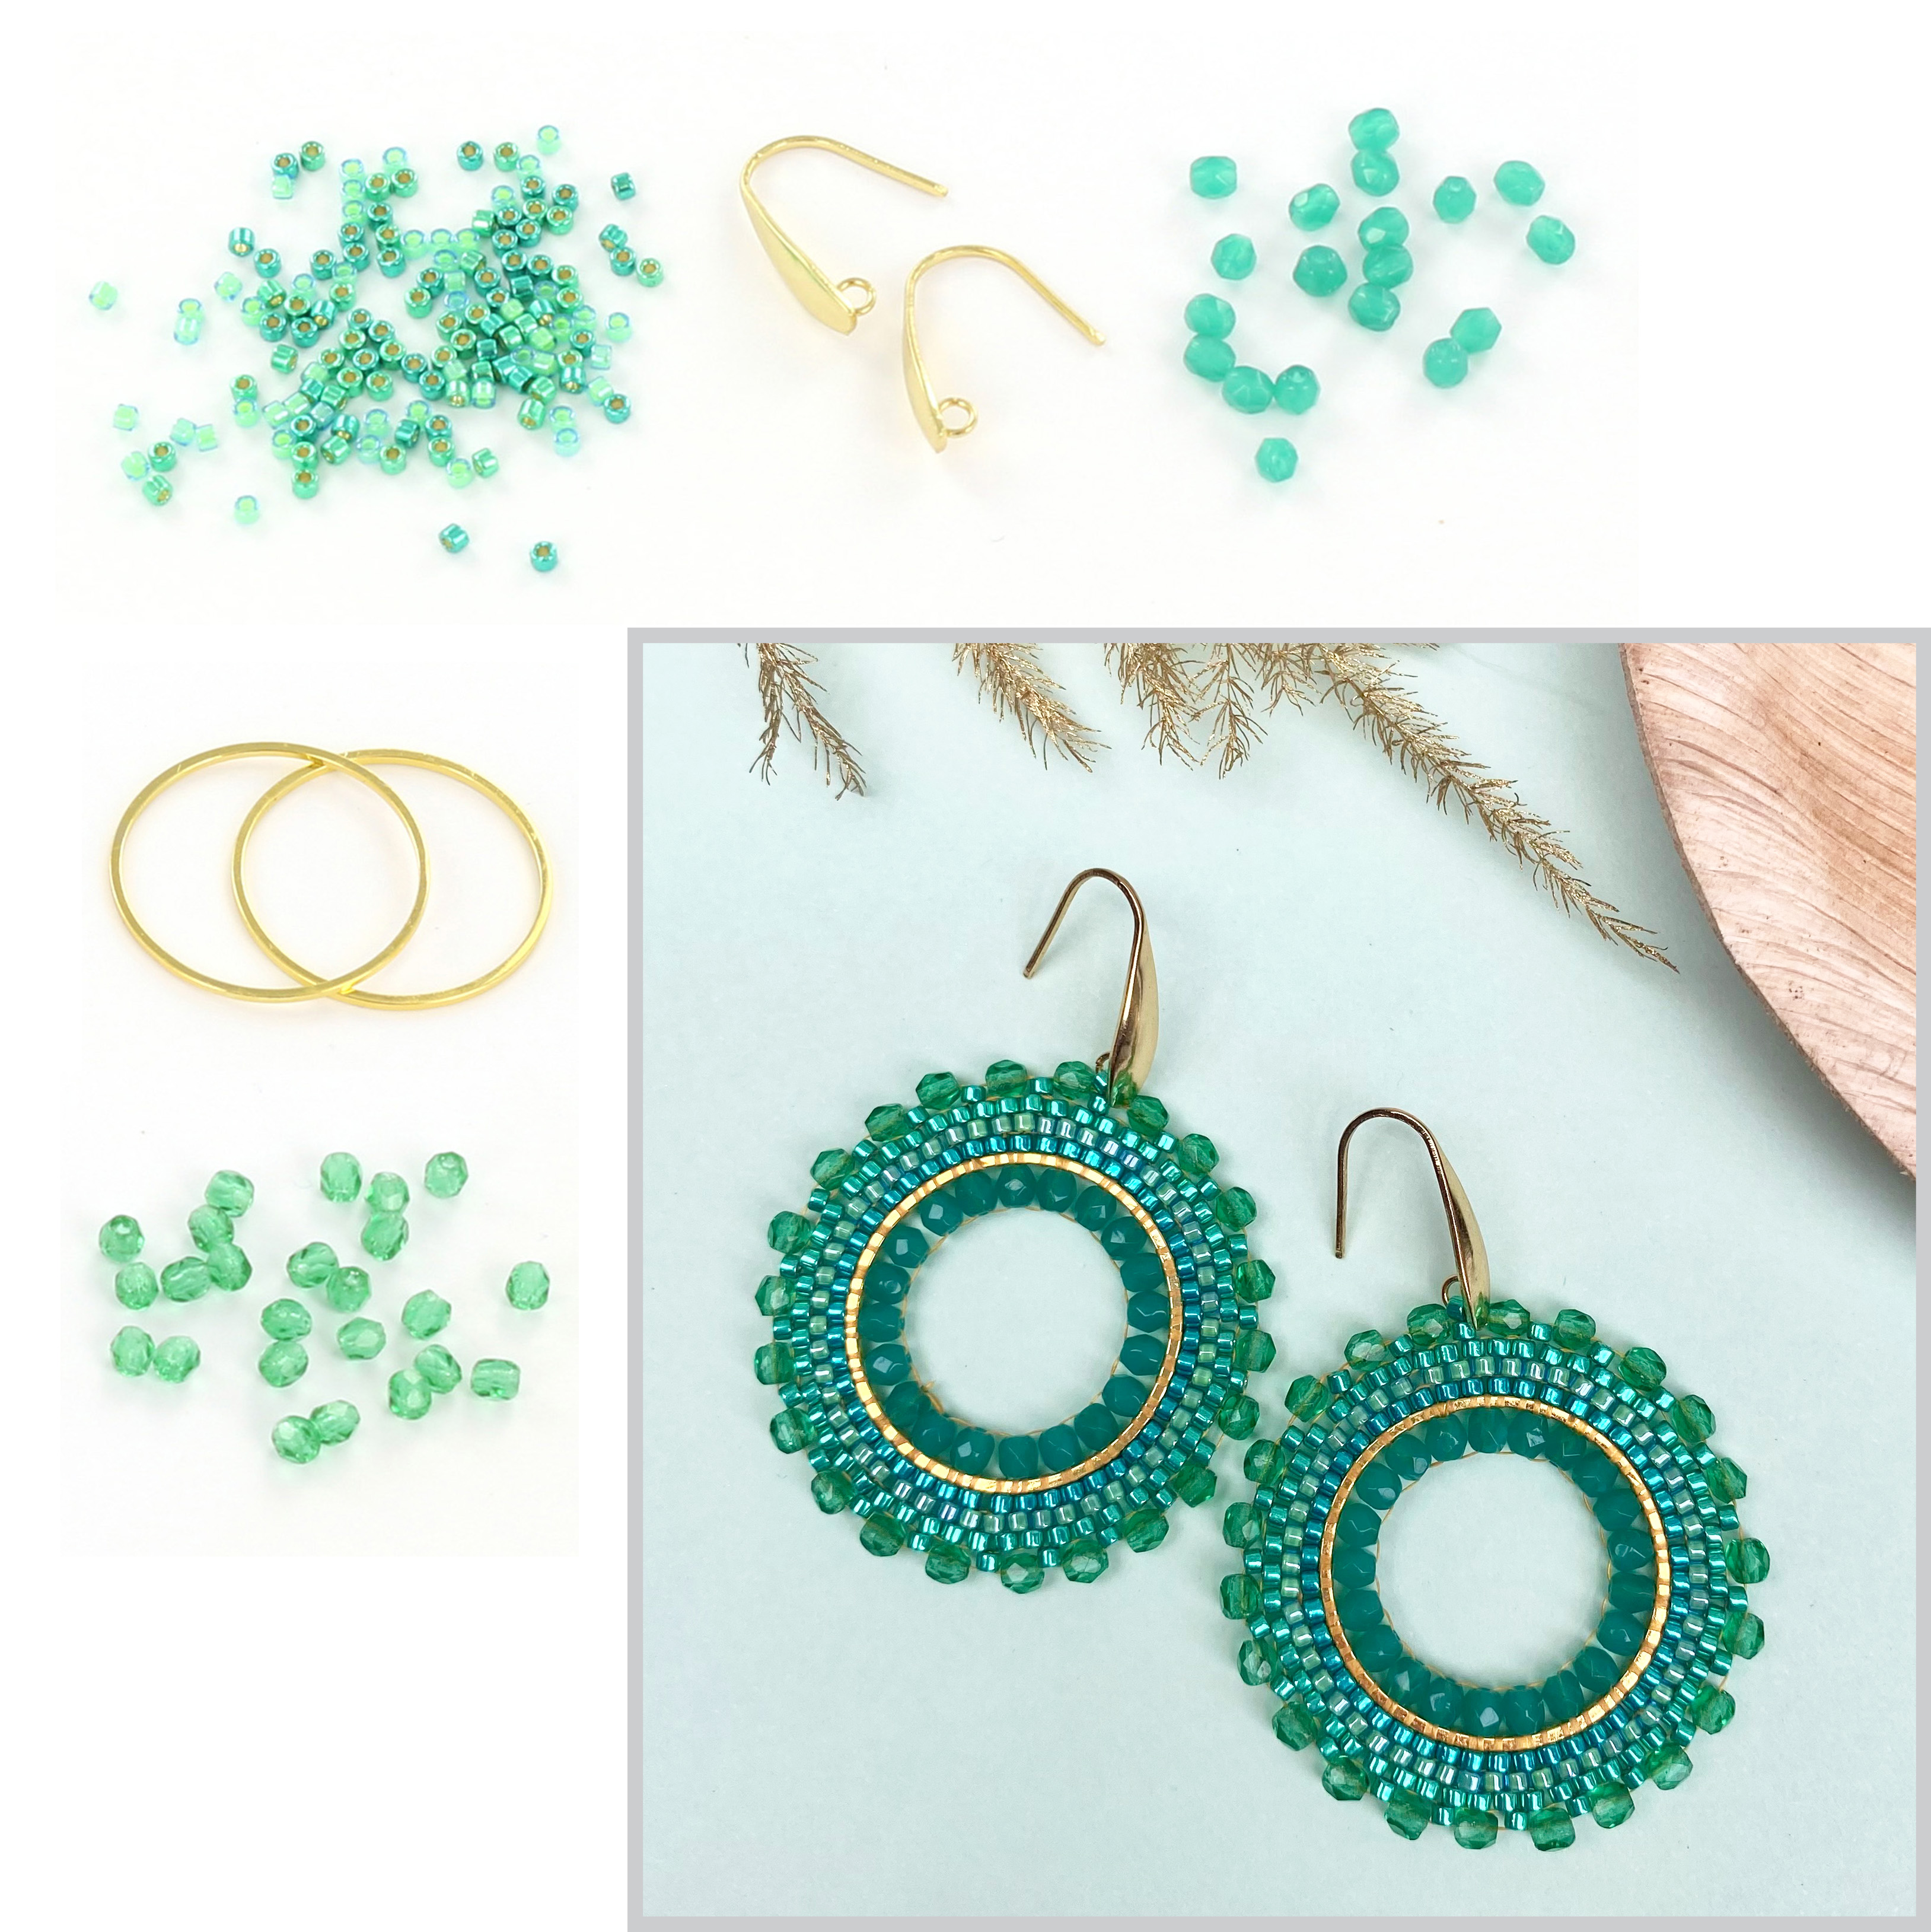 Extra pictures DIY kit round earrings - green and gold